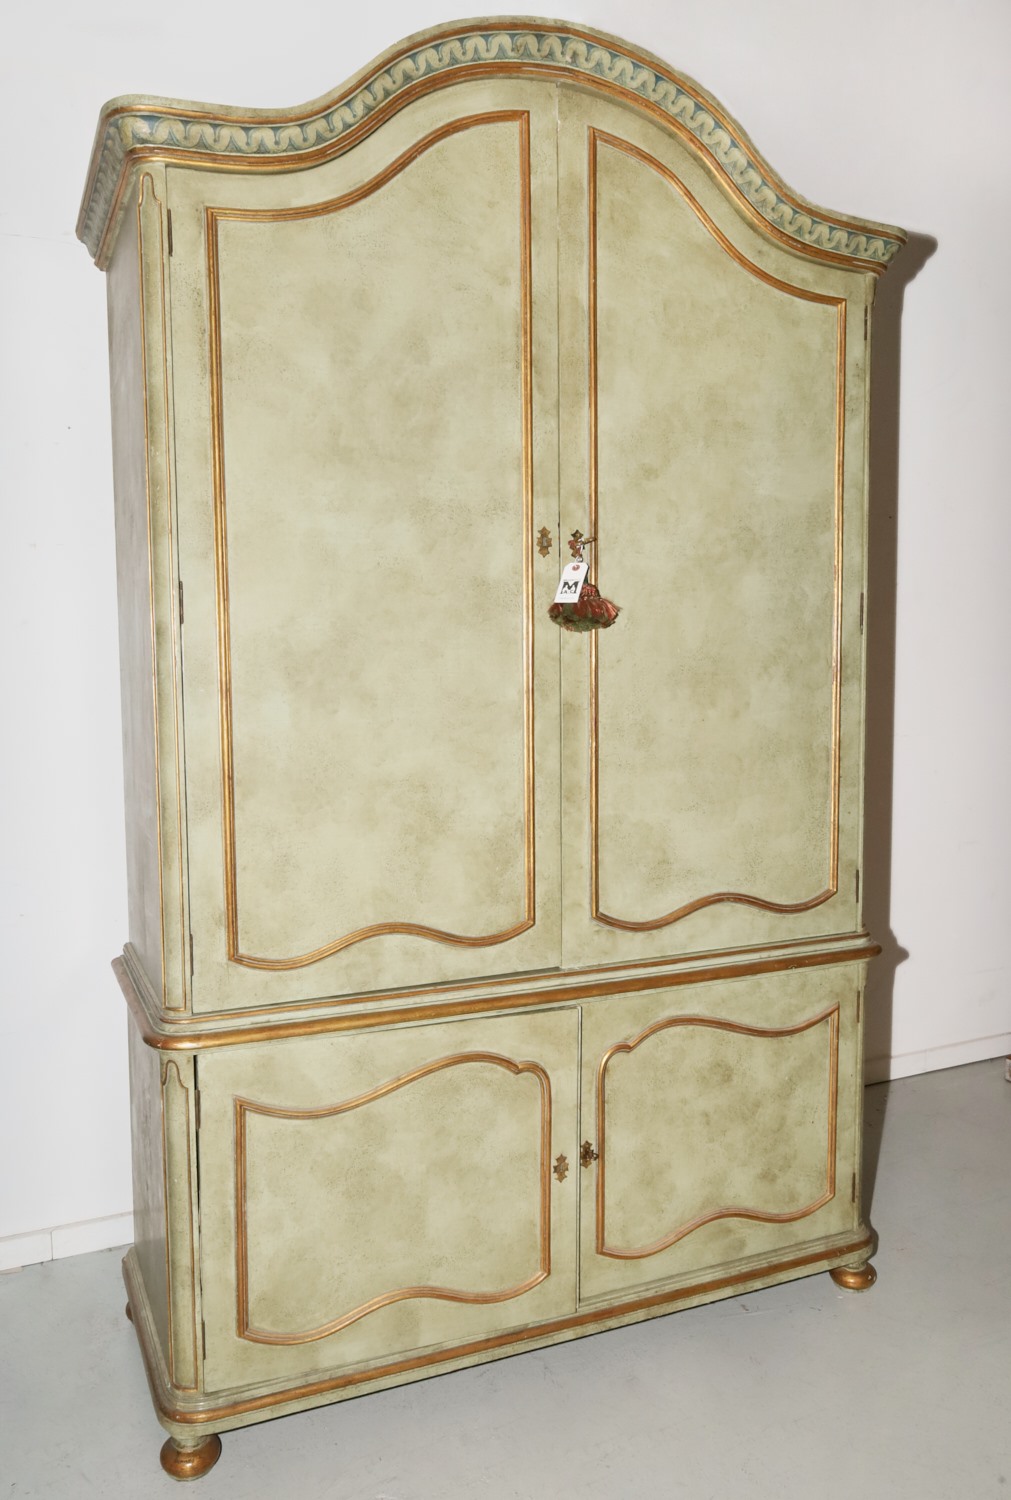 LARGE FAUX PAINTED FRENCH STYLE 361f5f